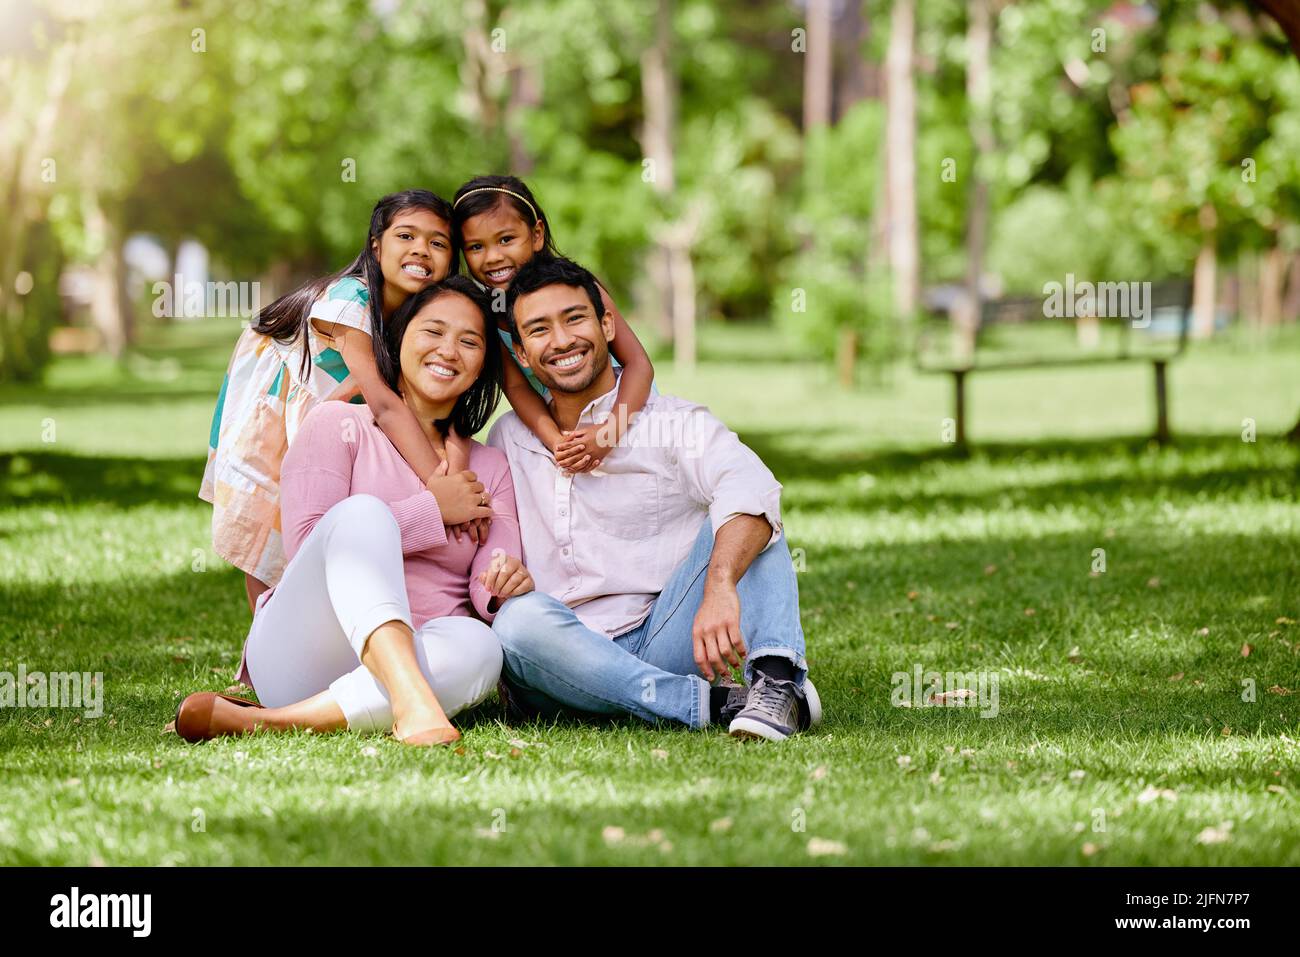 Portrait of happy asian family in the park. Adorable little girls bonding and hugging their parents outside in a park. Full length husband and wife Stock Photo